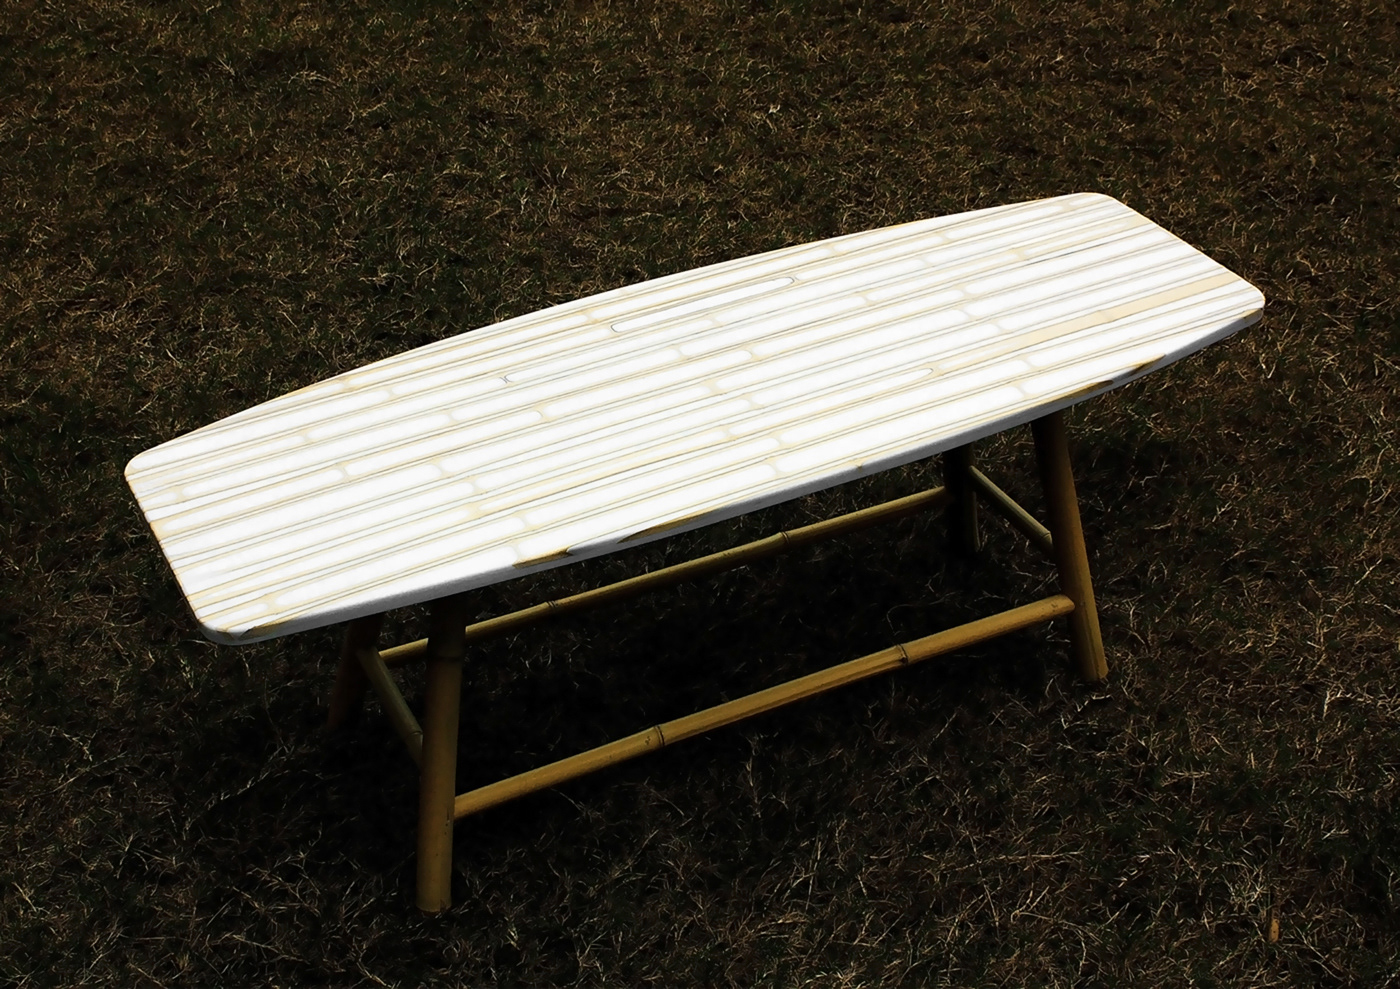 funiture product design  industrial design  bamboo Red Dot bench chair resin plastic eco deisgn